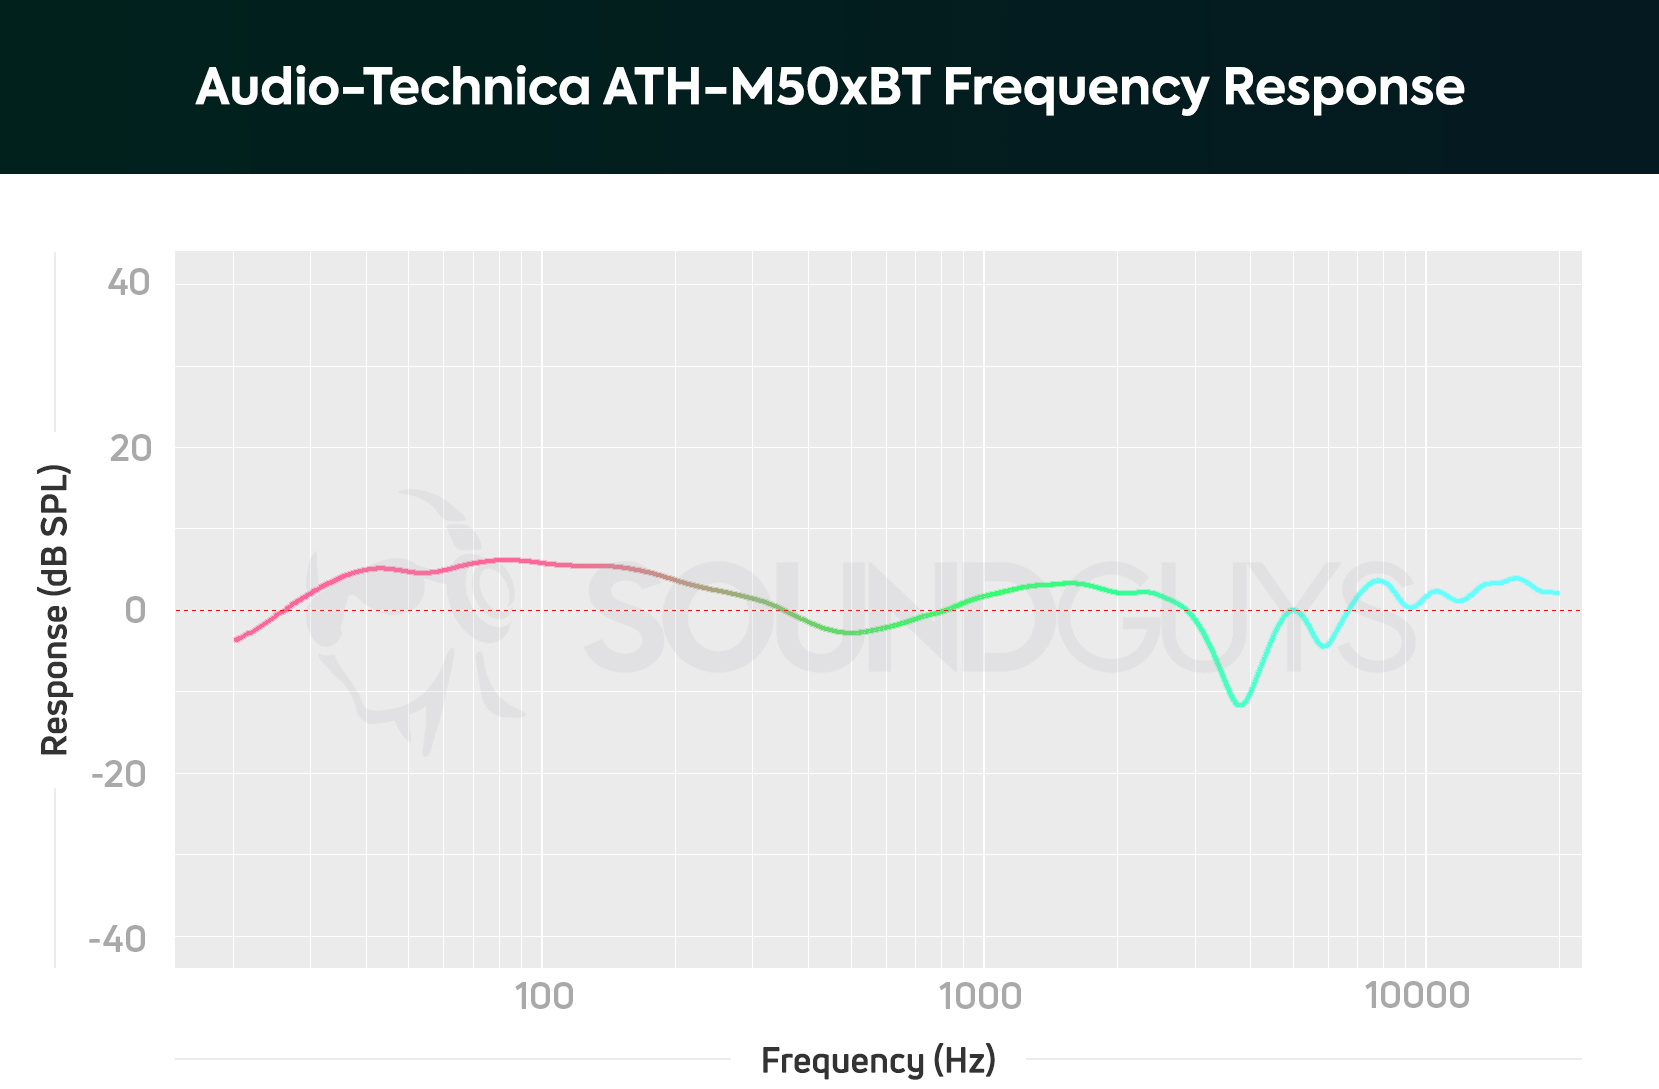 Audio-Technica ATH-M50xBT frequency response chart.